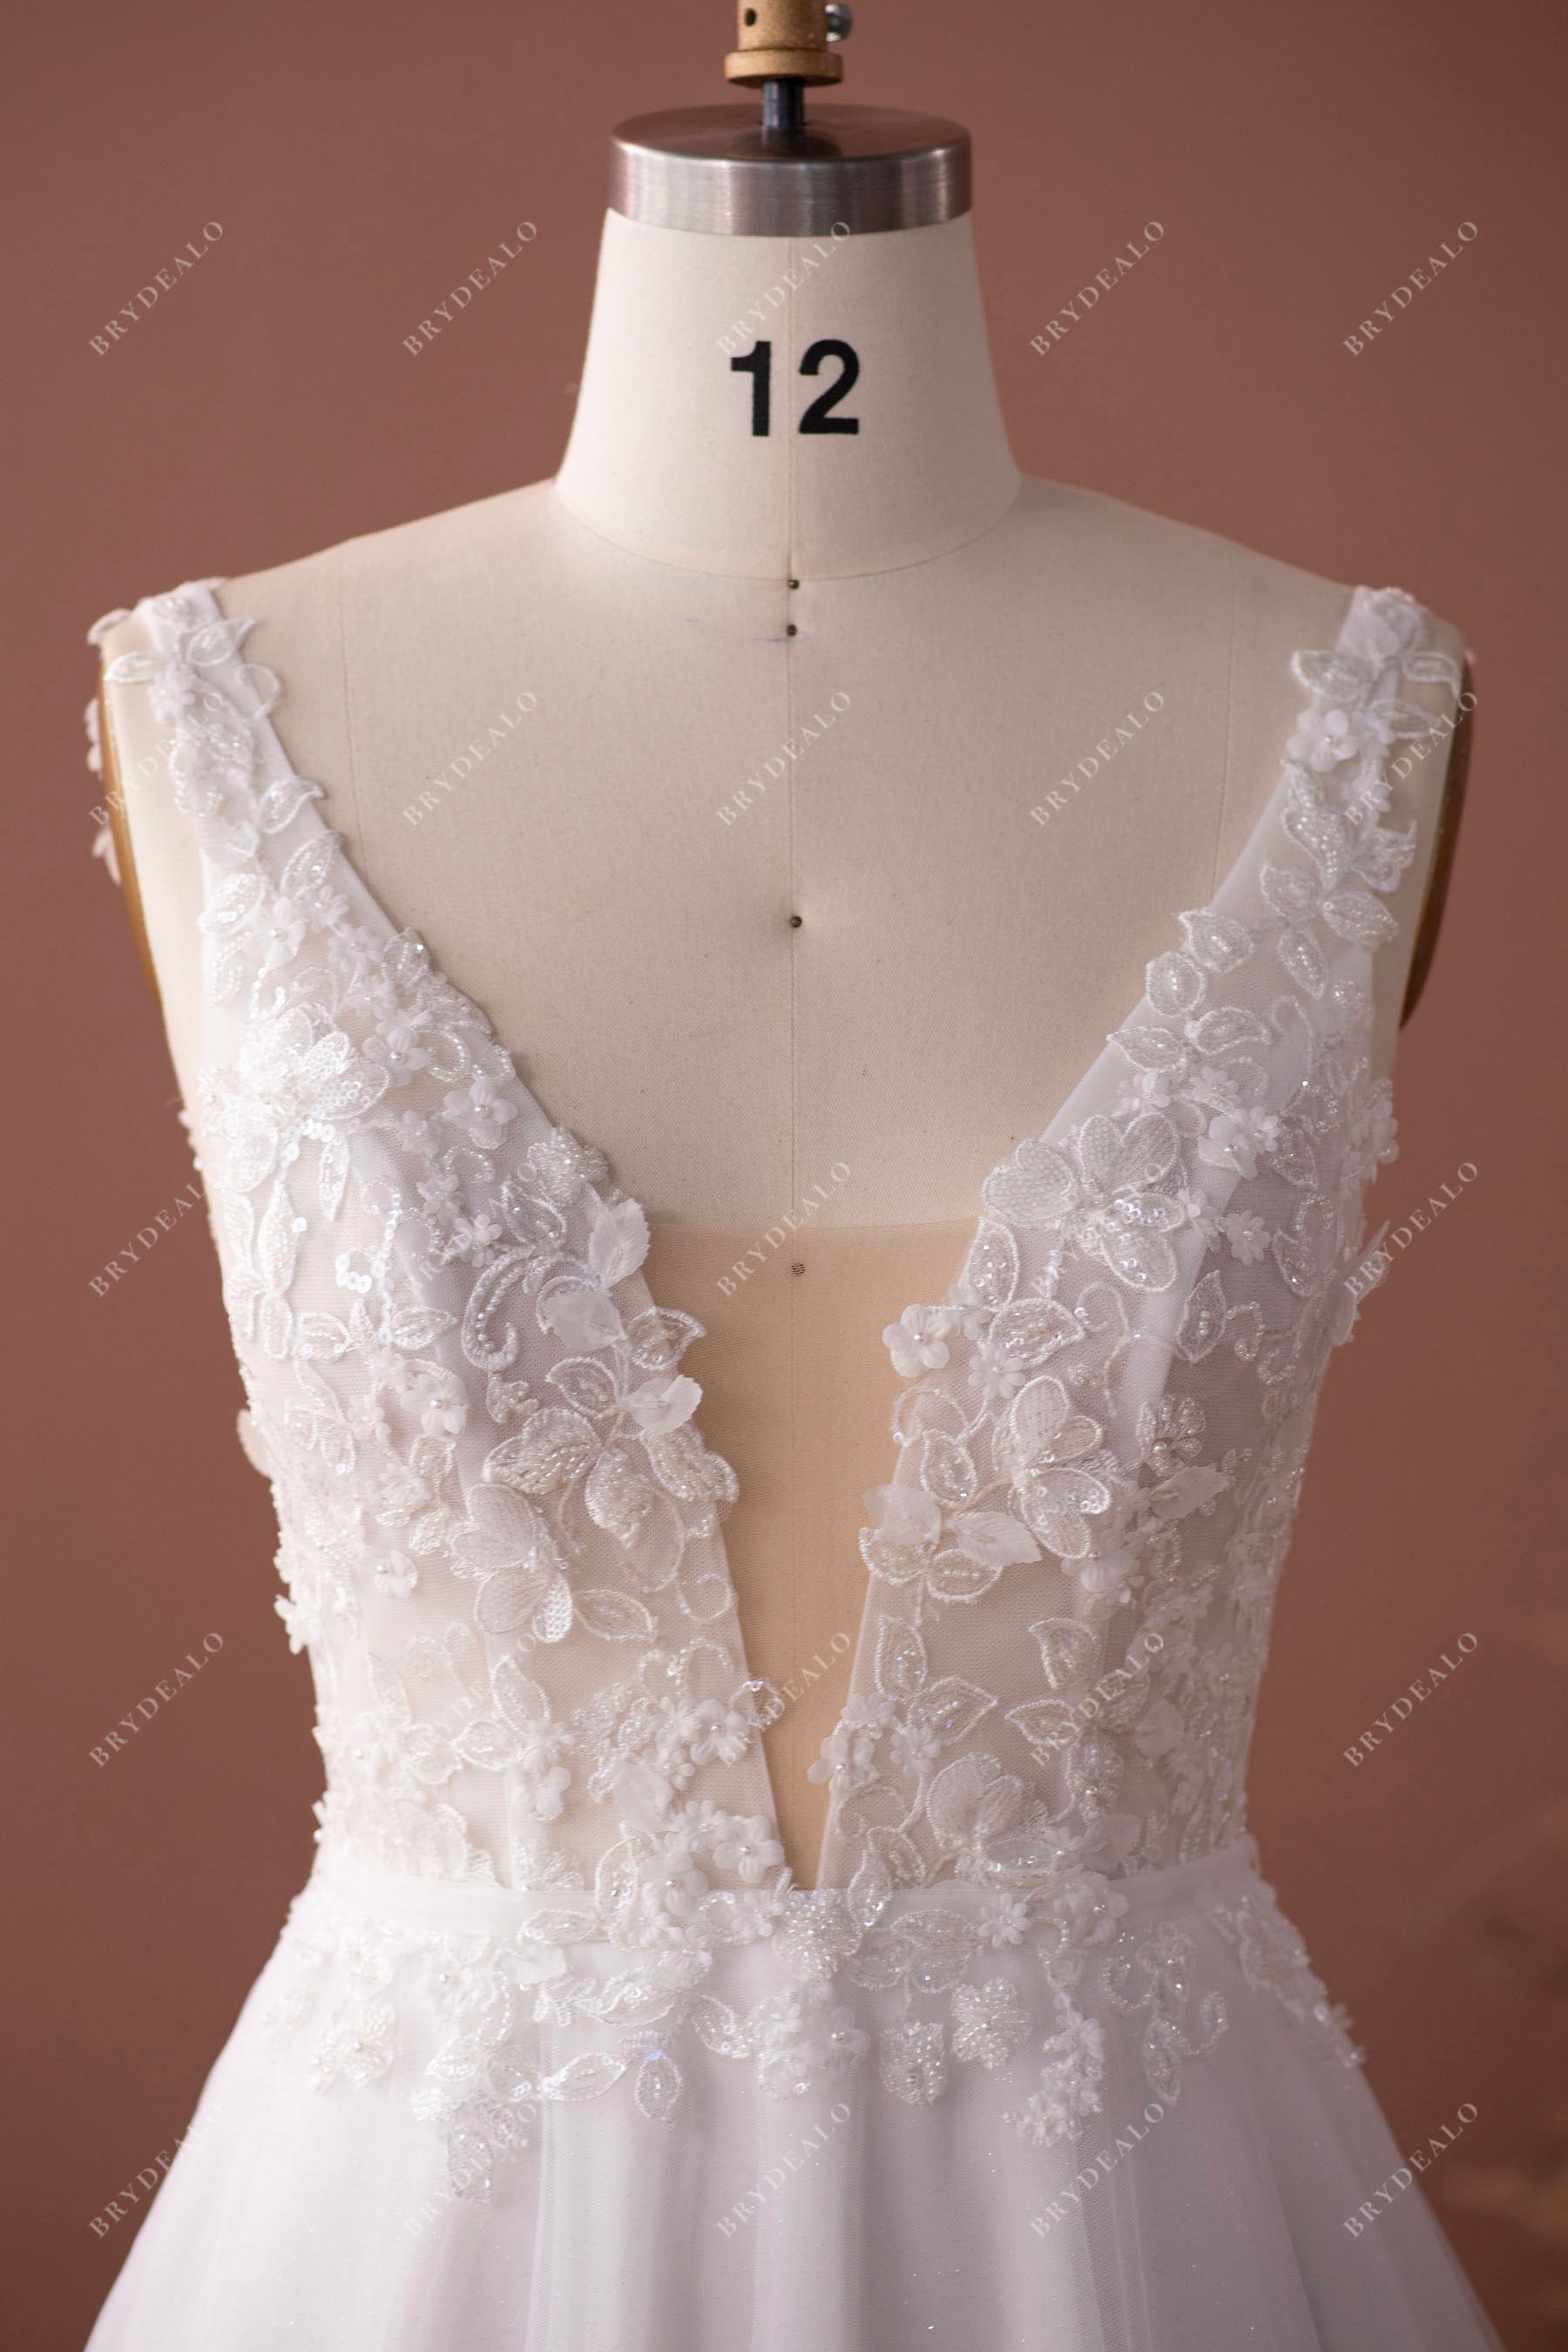 plunging flower lace wedding dress